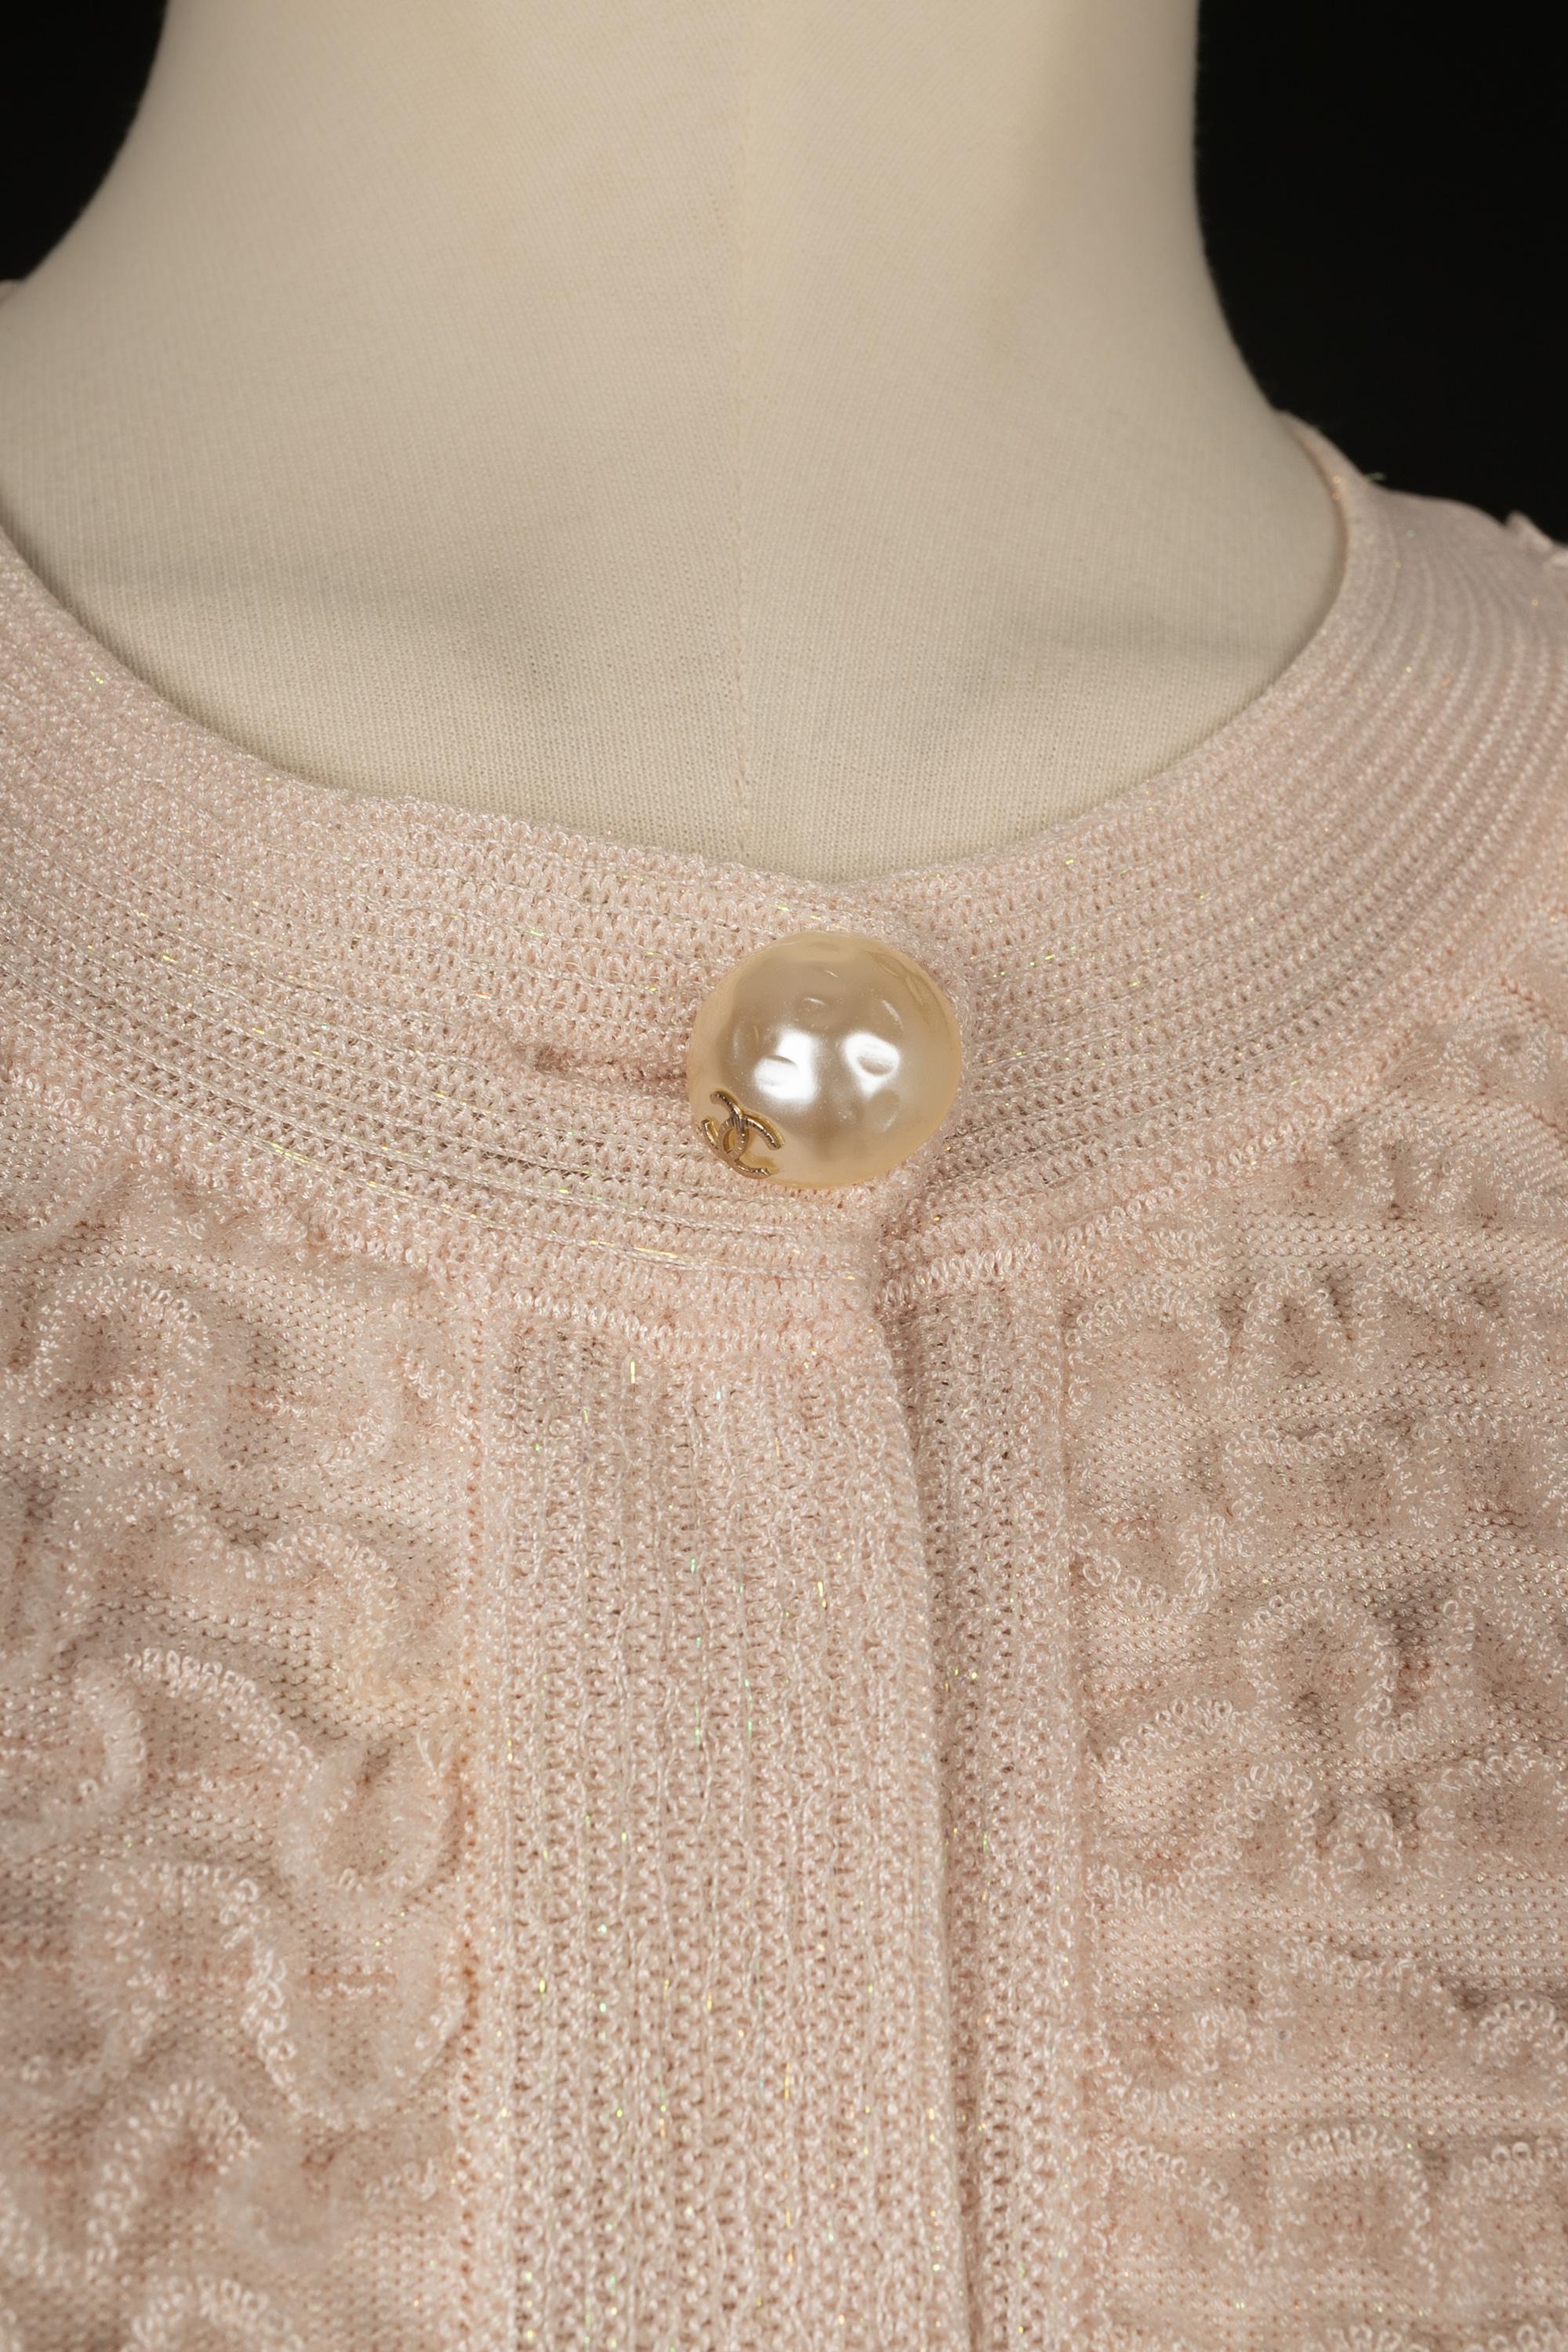 Chanel cardigan / jacket 2012 For Sale 1